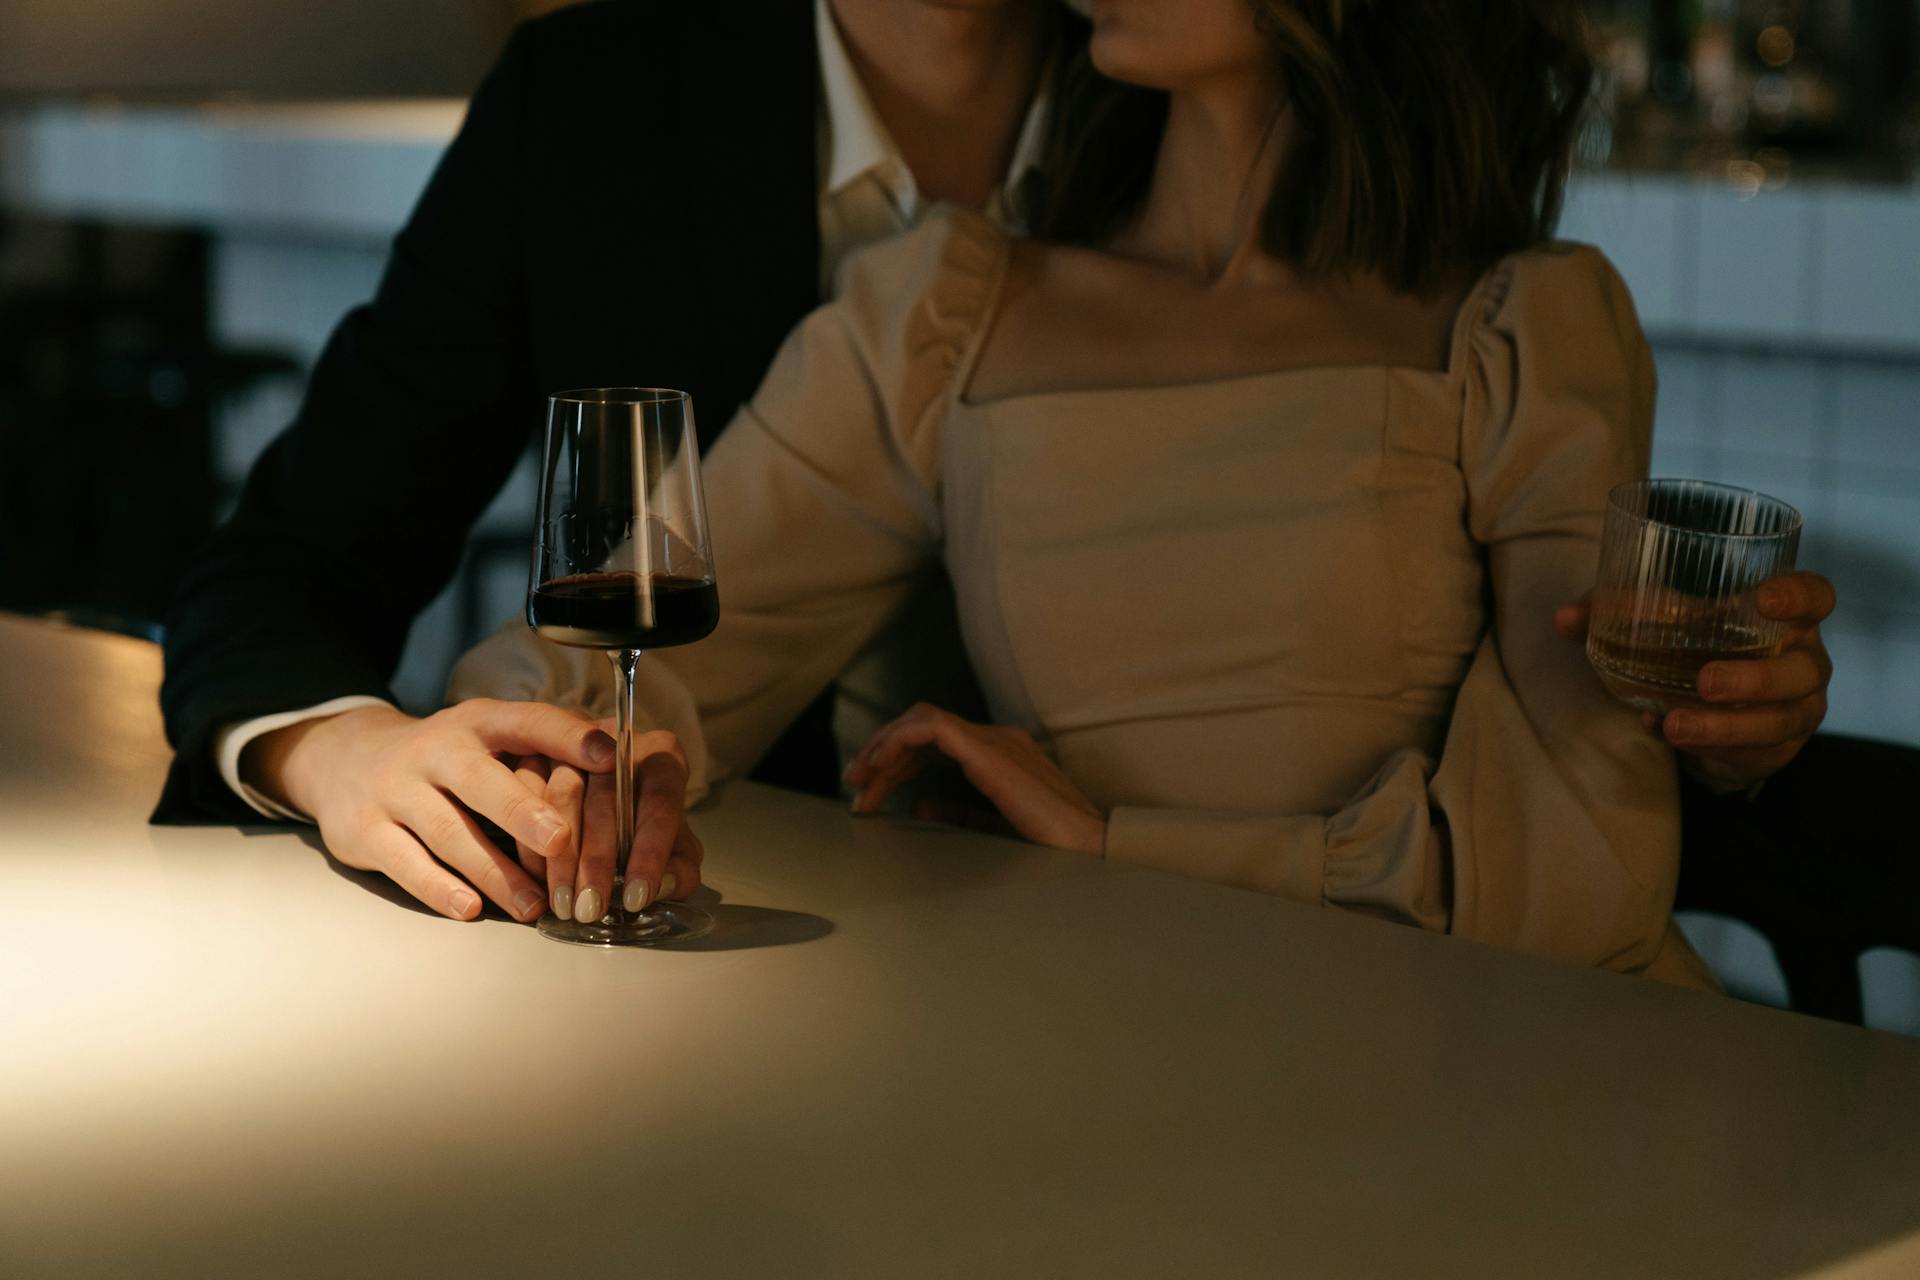 A couple sitting at a table | Source: Pexels